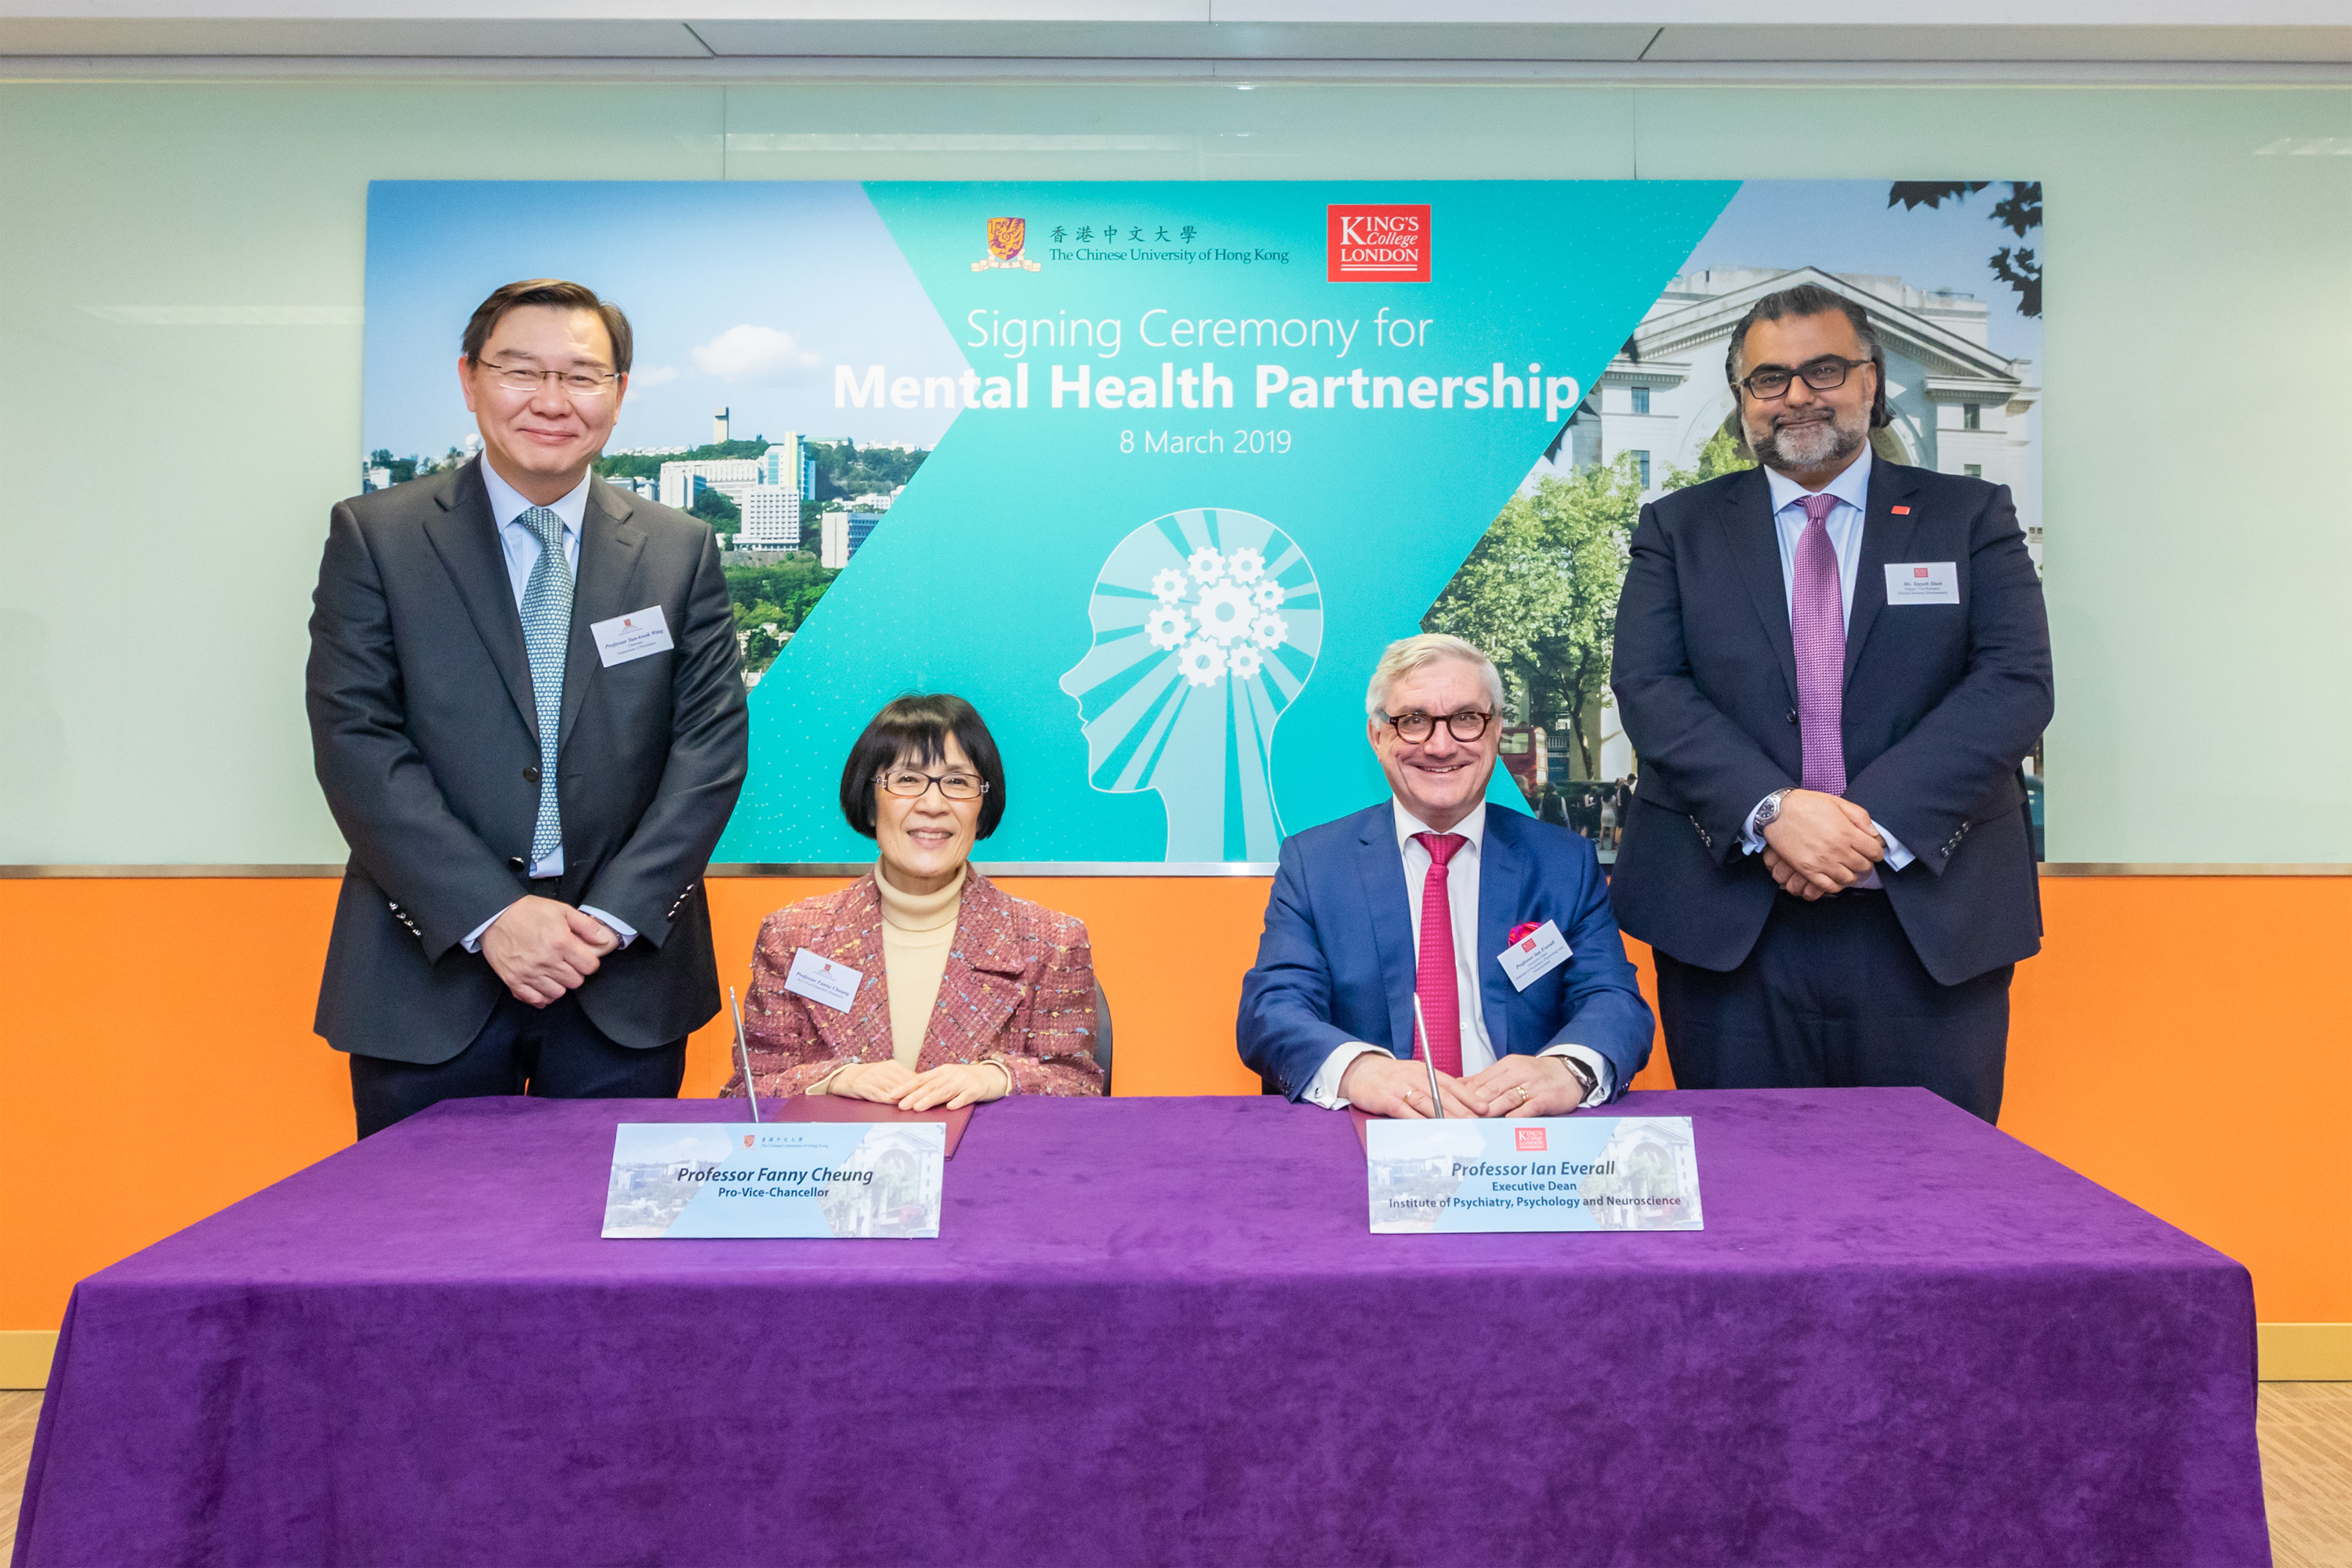 CUHK and KCL join hands to advance mental health care in Hong Kong by adopting novel technologies. [From left: Prof. Yun Kwok WING, Chairman of the Department of Psychiatry, Faculty of Medicine at CUHK; Prof. Fanny CHEUNG, Pro-Vice-Chancellor of CUHK; Prof. Ian EVERALL, Executive Dean of the Institute of Psychiatry, Psychology, and Neuroscience at KCL; and Mr. Tayyeb SHAH, Deputy Vice President (Global Business Development) of KCL.]